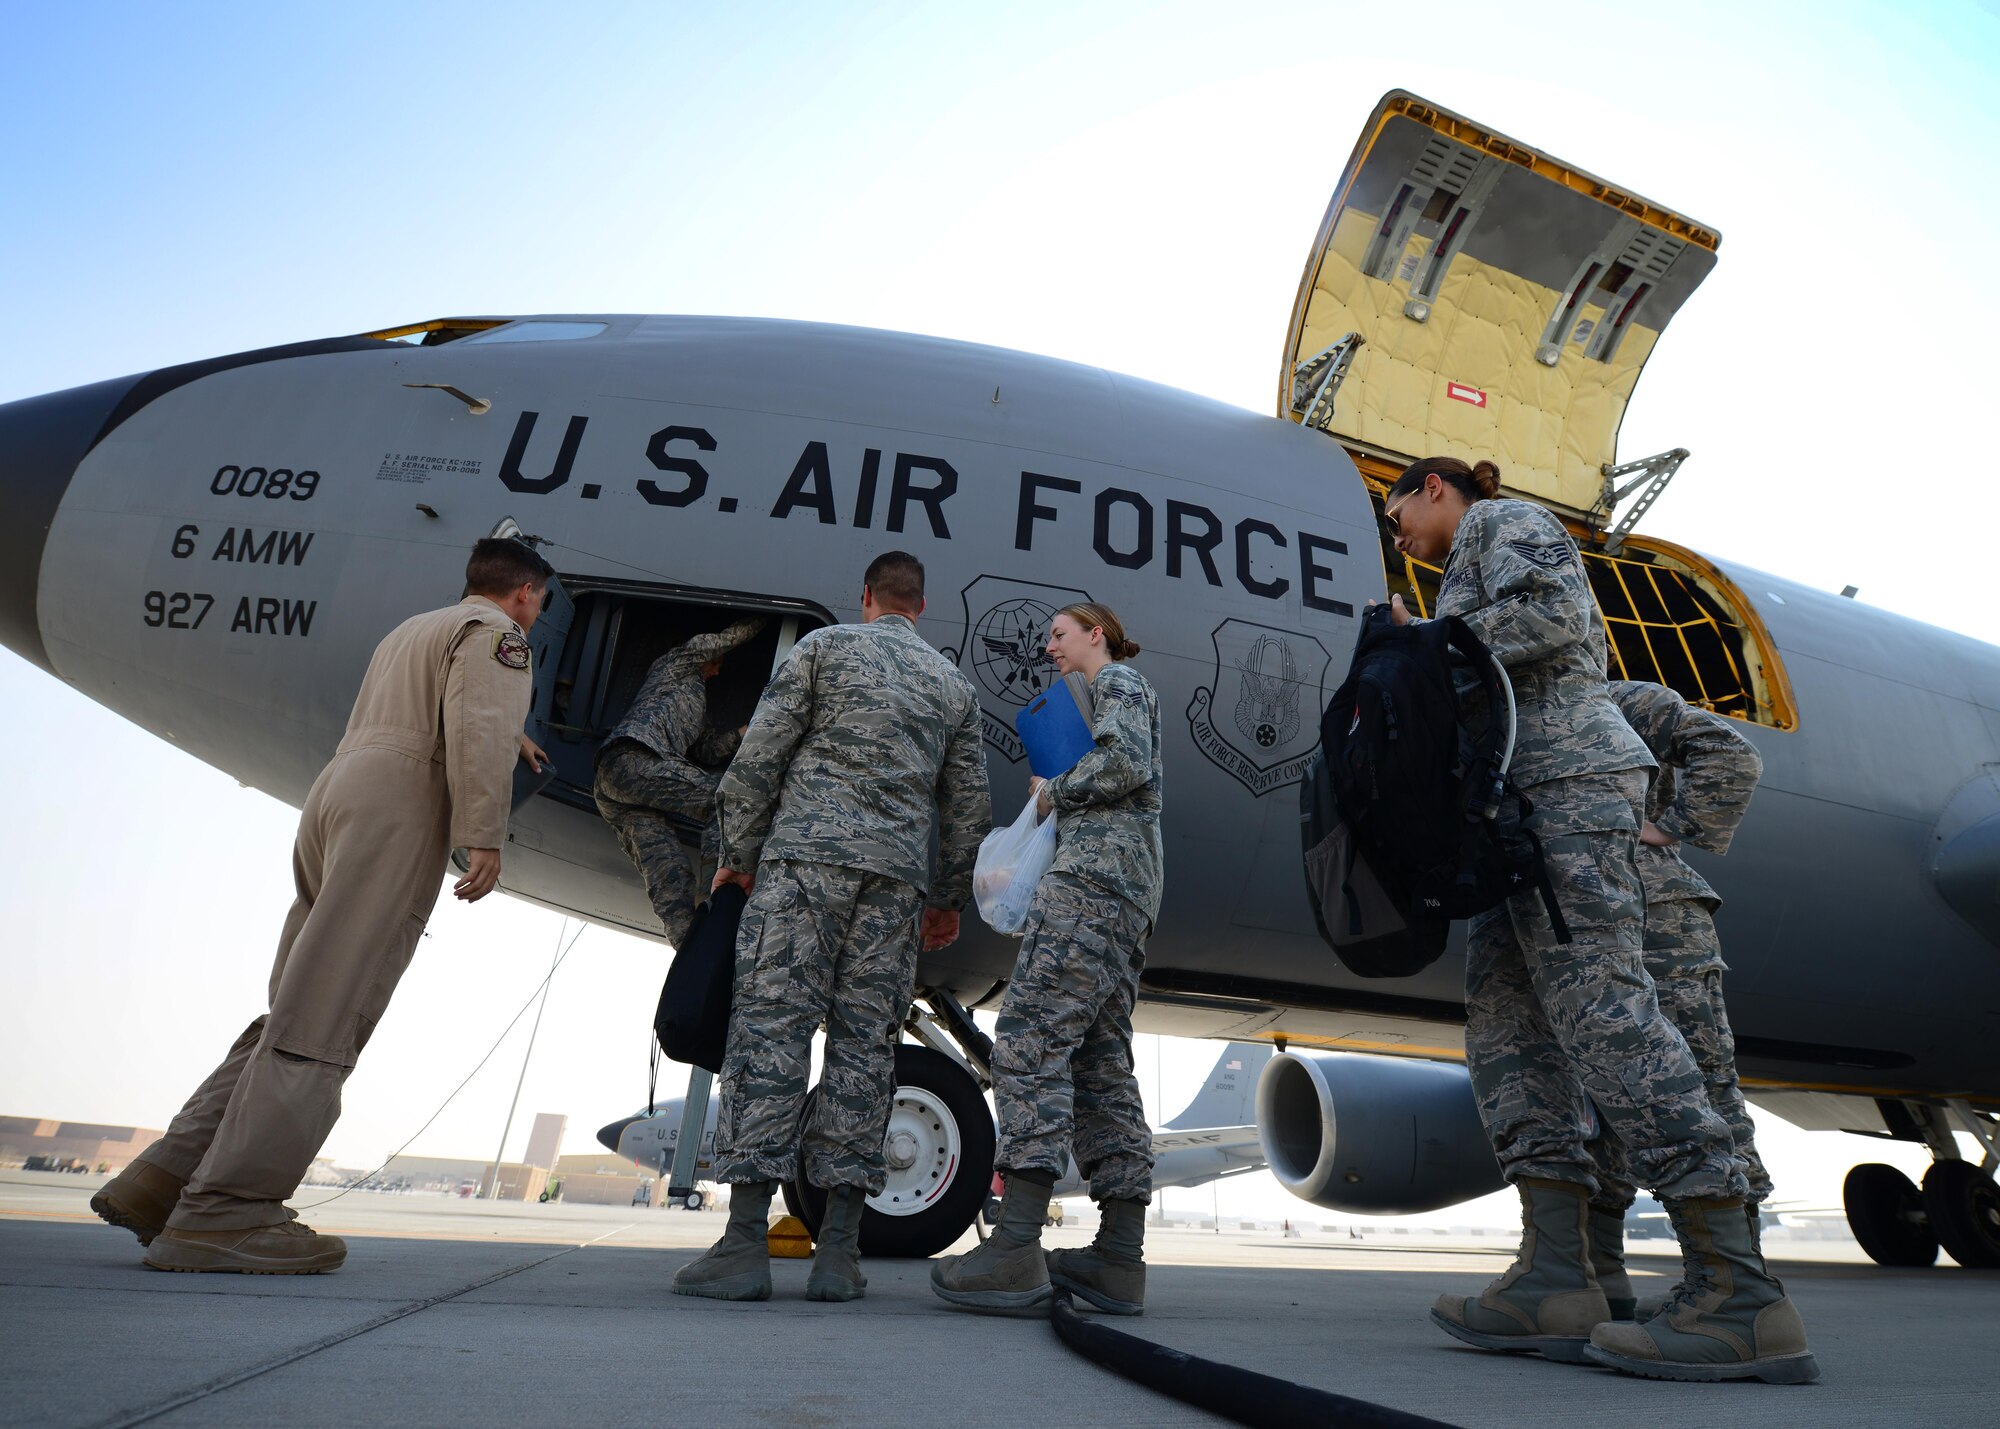 Airmen with the 379th Air Expeditionary Wing board a KC-135 Stratotanker at Al Udeid Air Base, Qatar Oct. 27, 2016. The members were from units across the base and took part in an incentive flight hosted by the 340th Expeditionary Air Refueling Squadron. (U.S. Air Force photo by Senior Airman Miles Wilson)